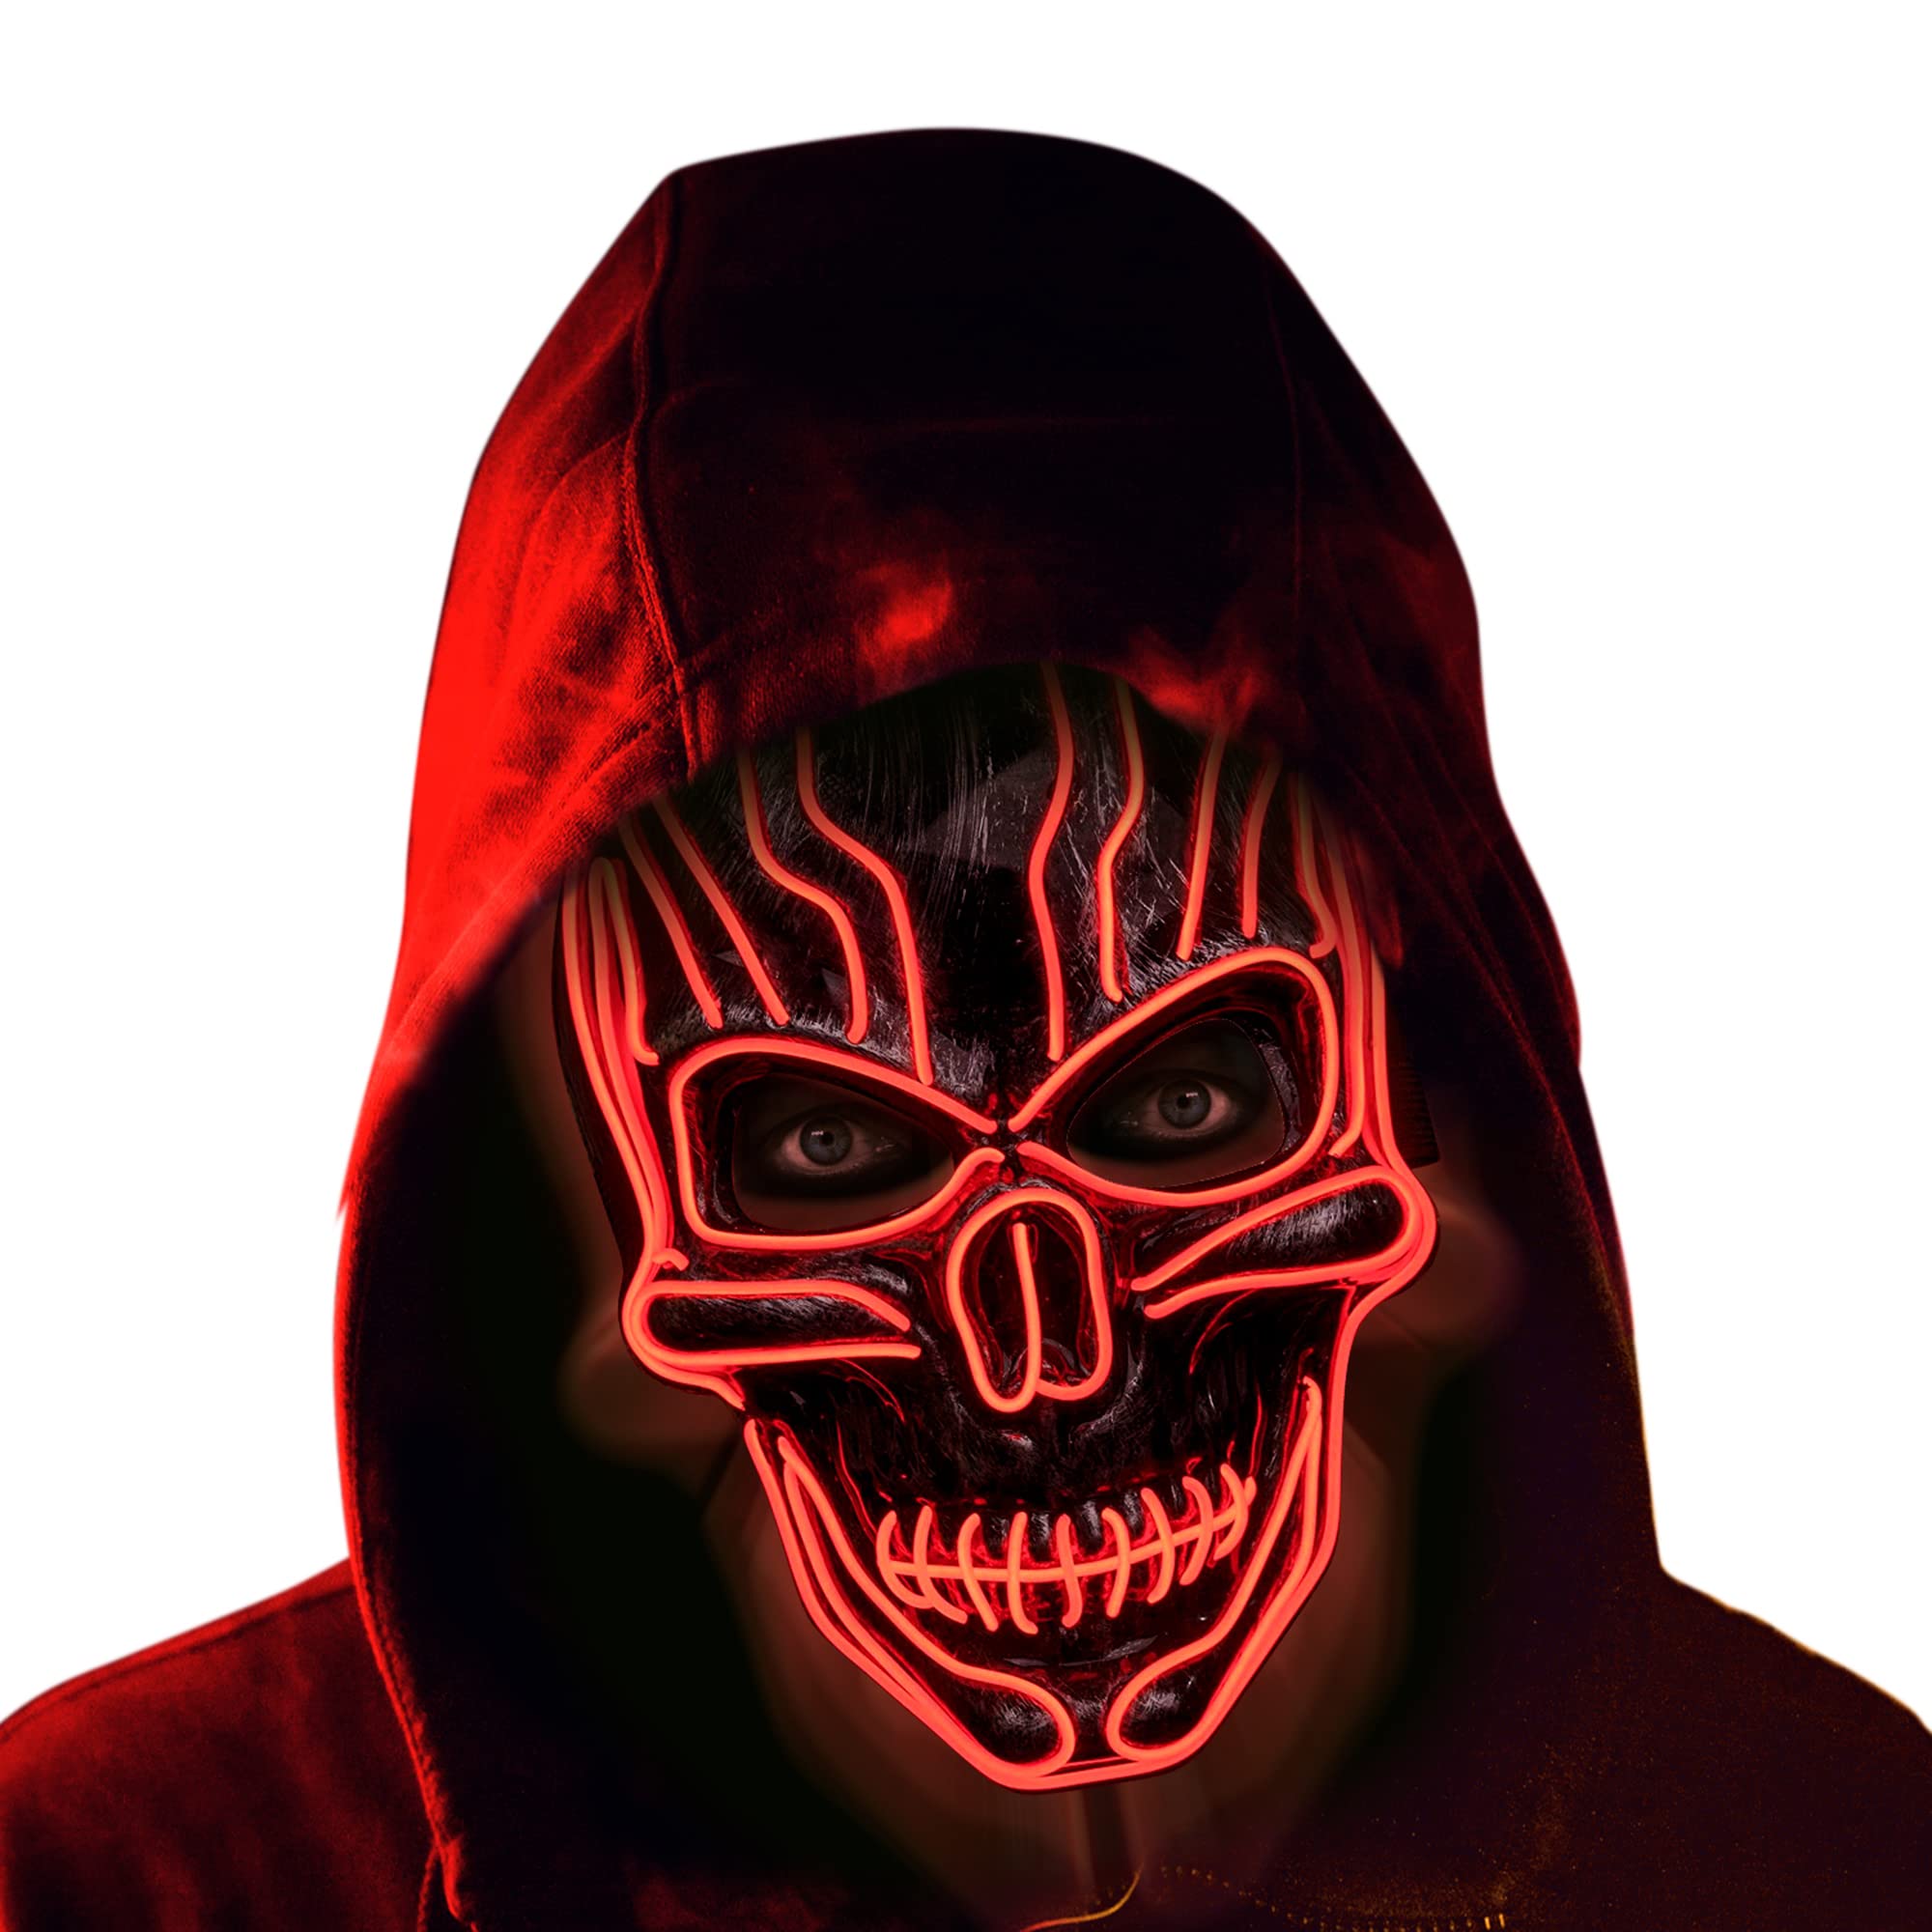 ILEBYGO LED Halloween Light Up Mask Purge Mask Scary Mask with EL Wire 3 Flashing-Modes for Halloween Festival, Party, Cos Play